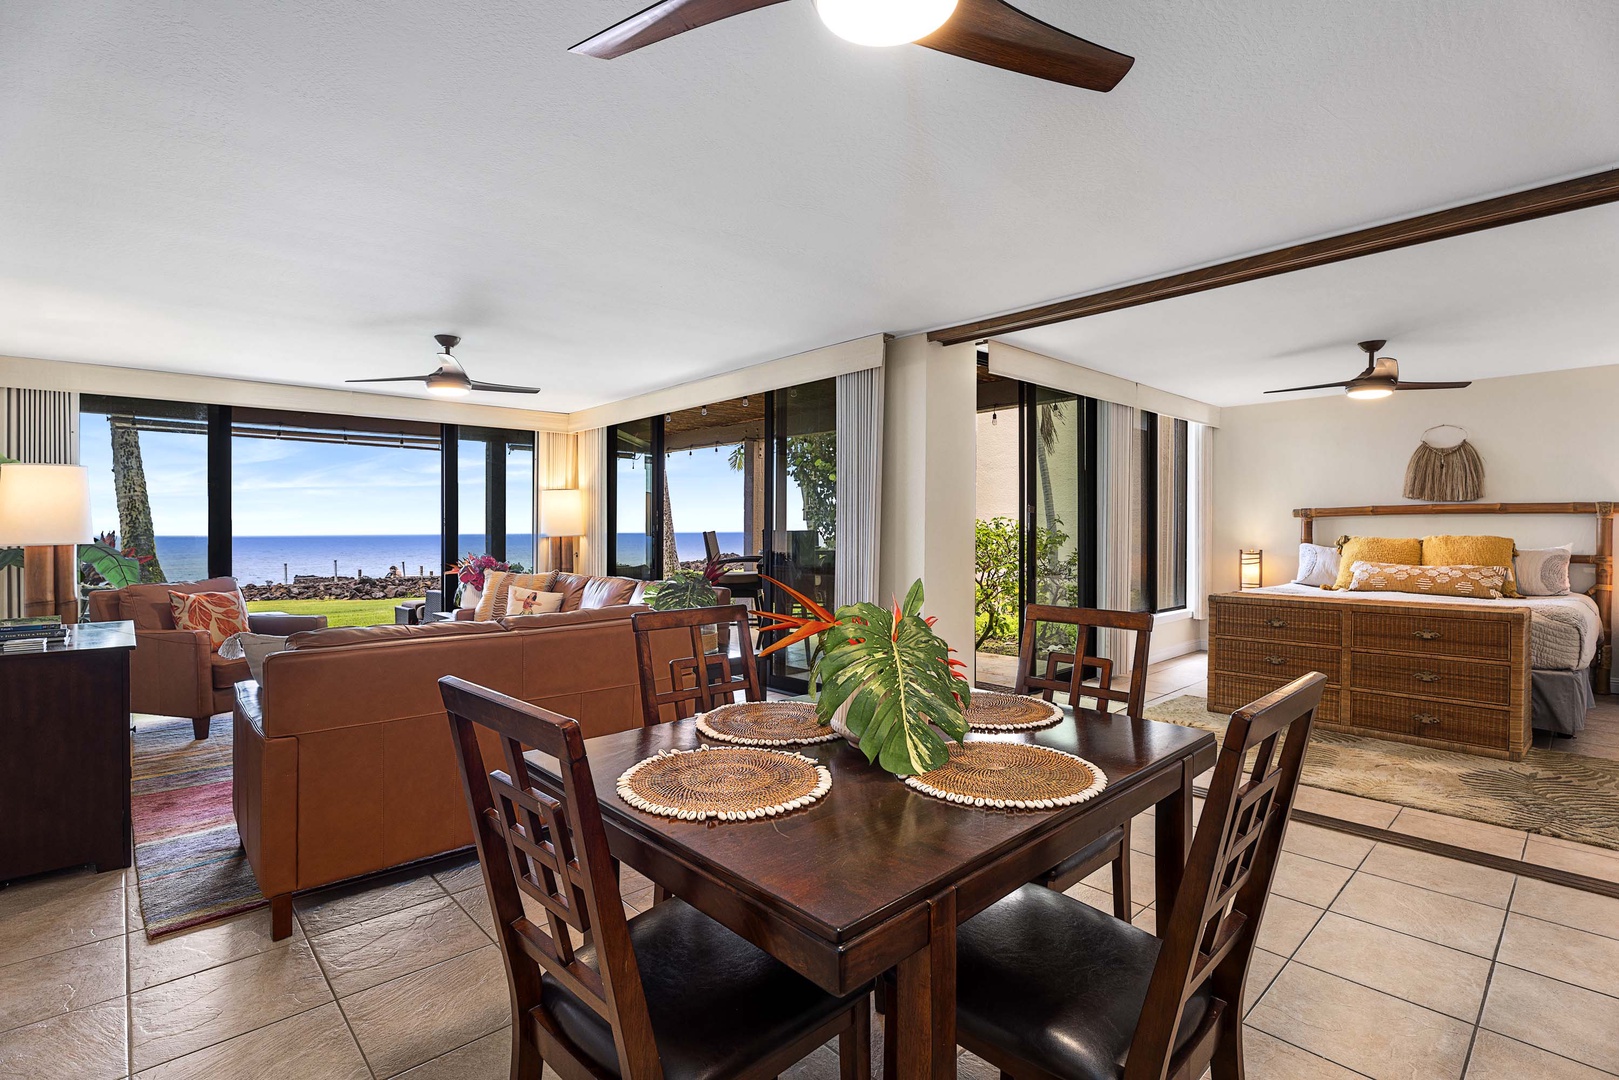 Kailua Kona Vacation Rentals, Keauhou Kona Surf & Racquet 2101 - The dining area is right beside the living space, in between the living and kitchen areas.